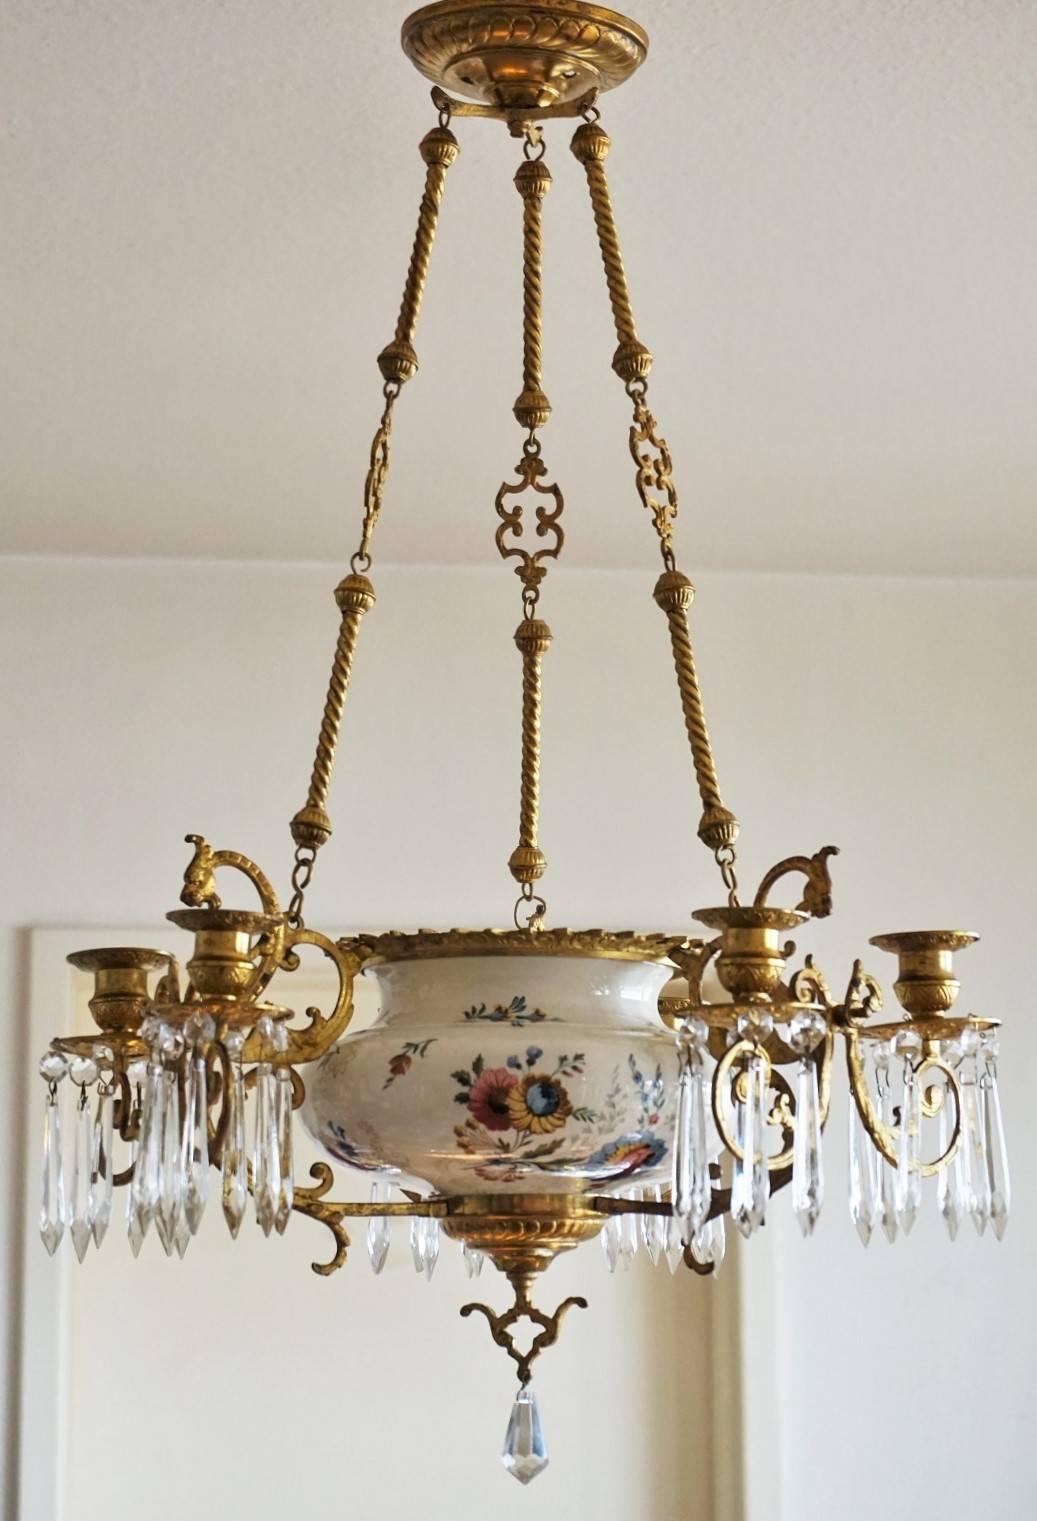 Gothic Revival 19th Century French Dóre Bronze and Faience Candle Chandelier, Choisy-le-Roy